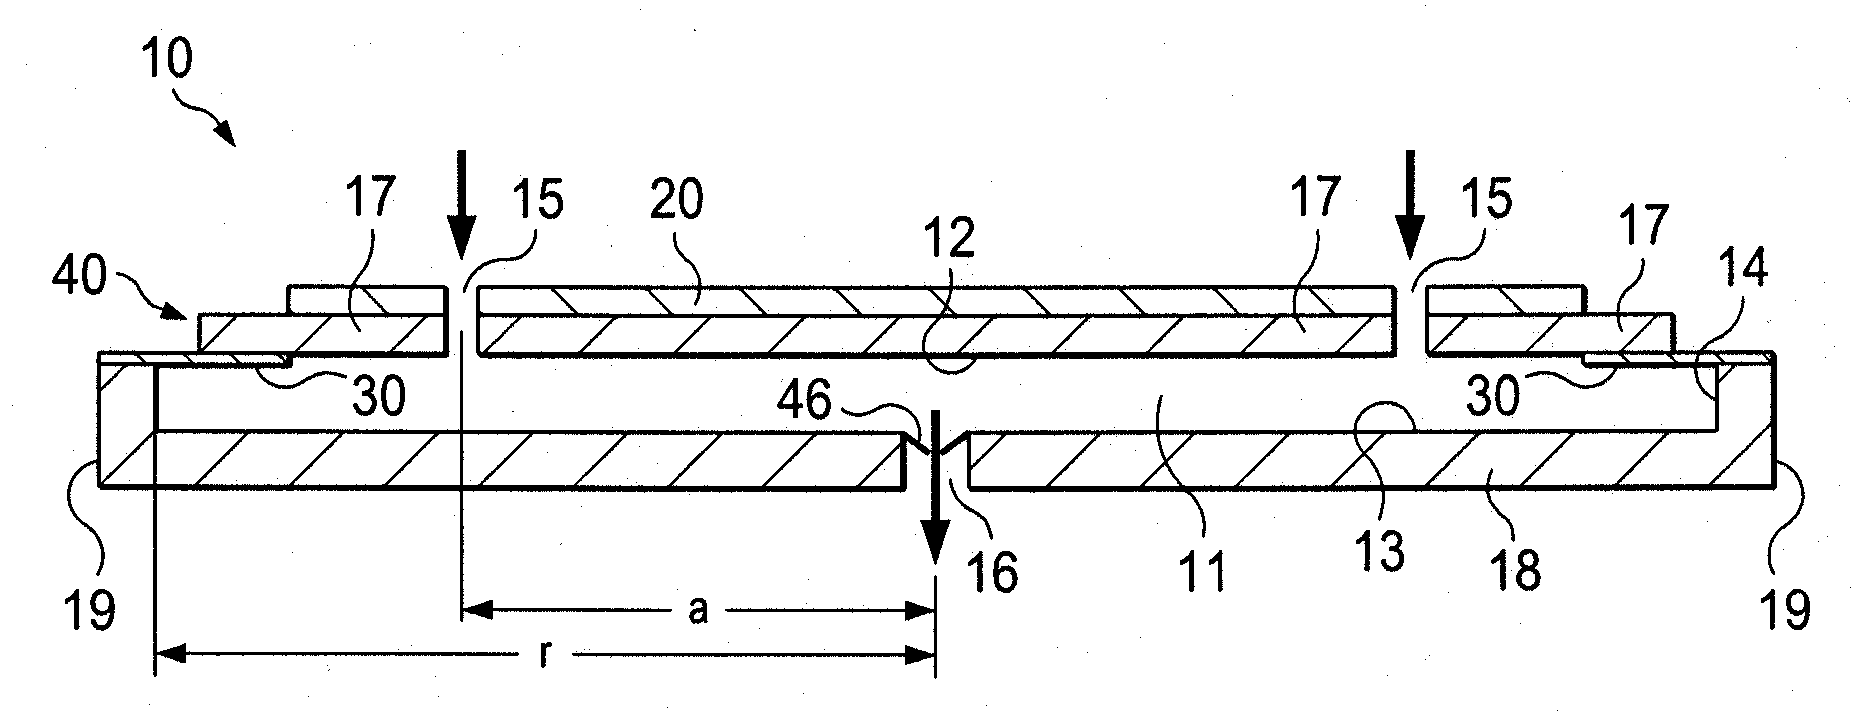 Fluid disc pump with square-wave driver